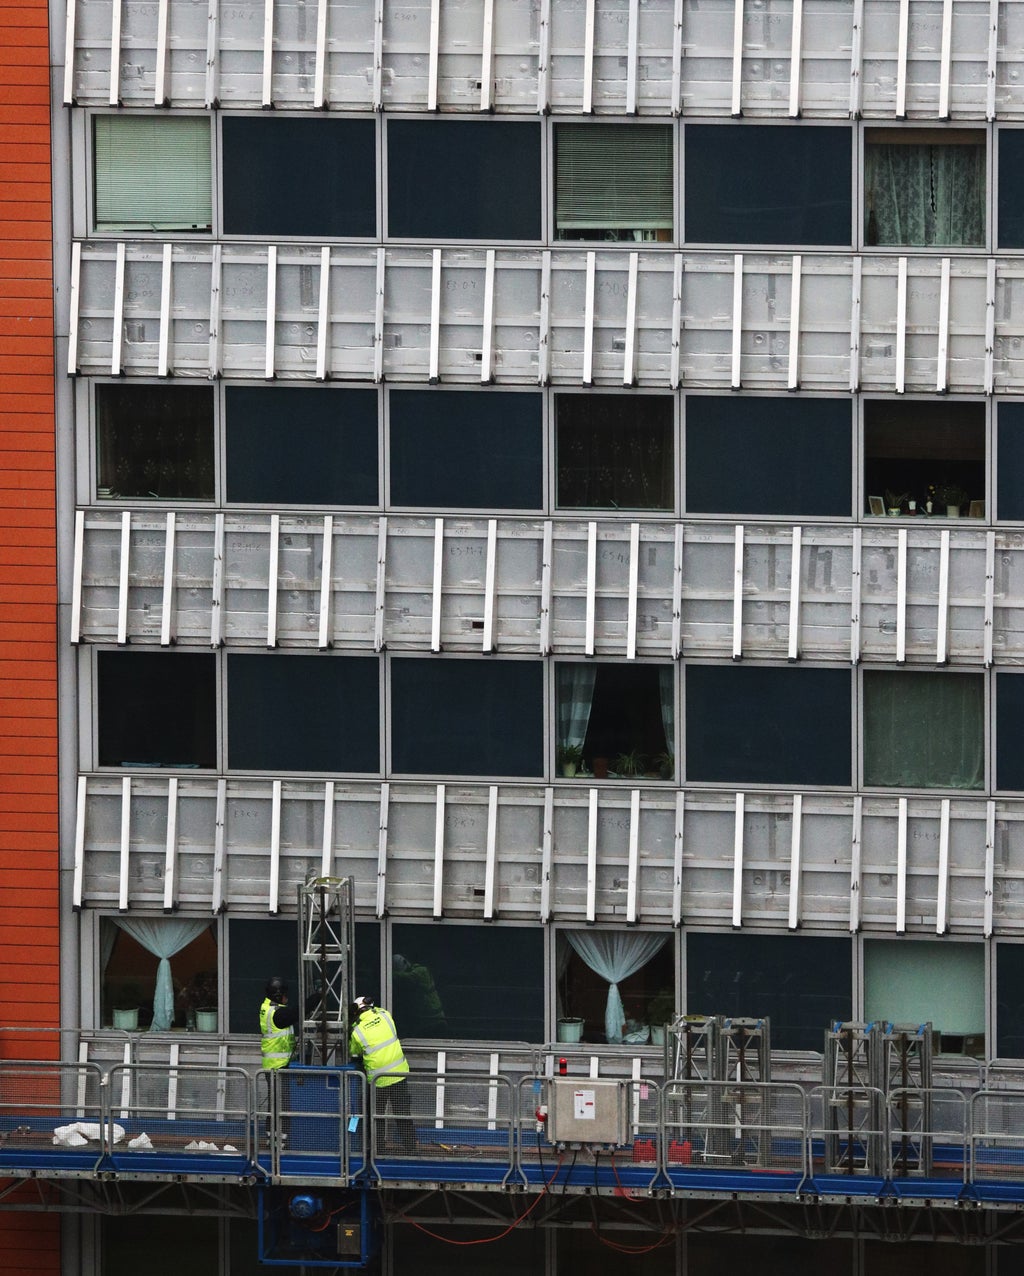 Crest Nicholson facing extra cladding bill up to £120m after fire safety pledge